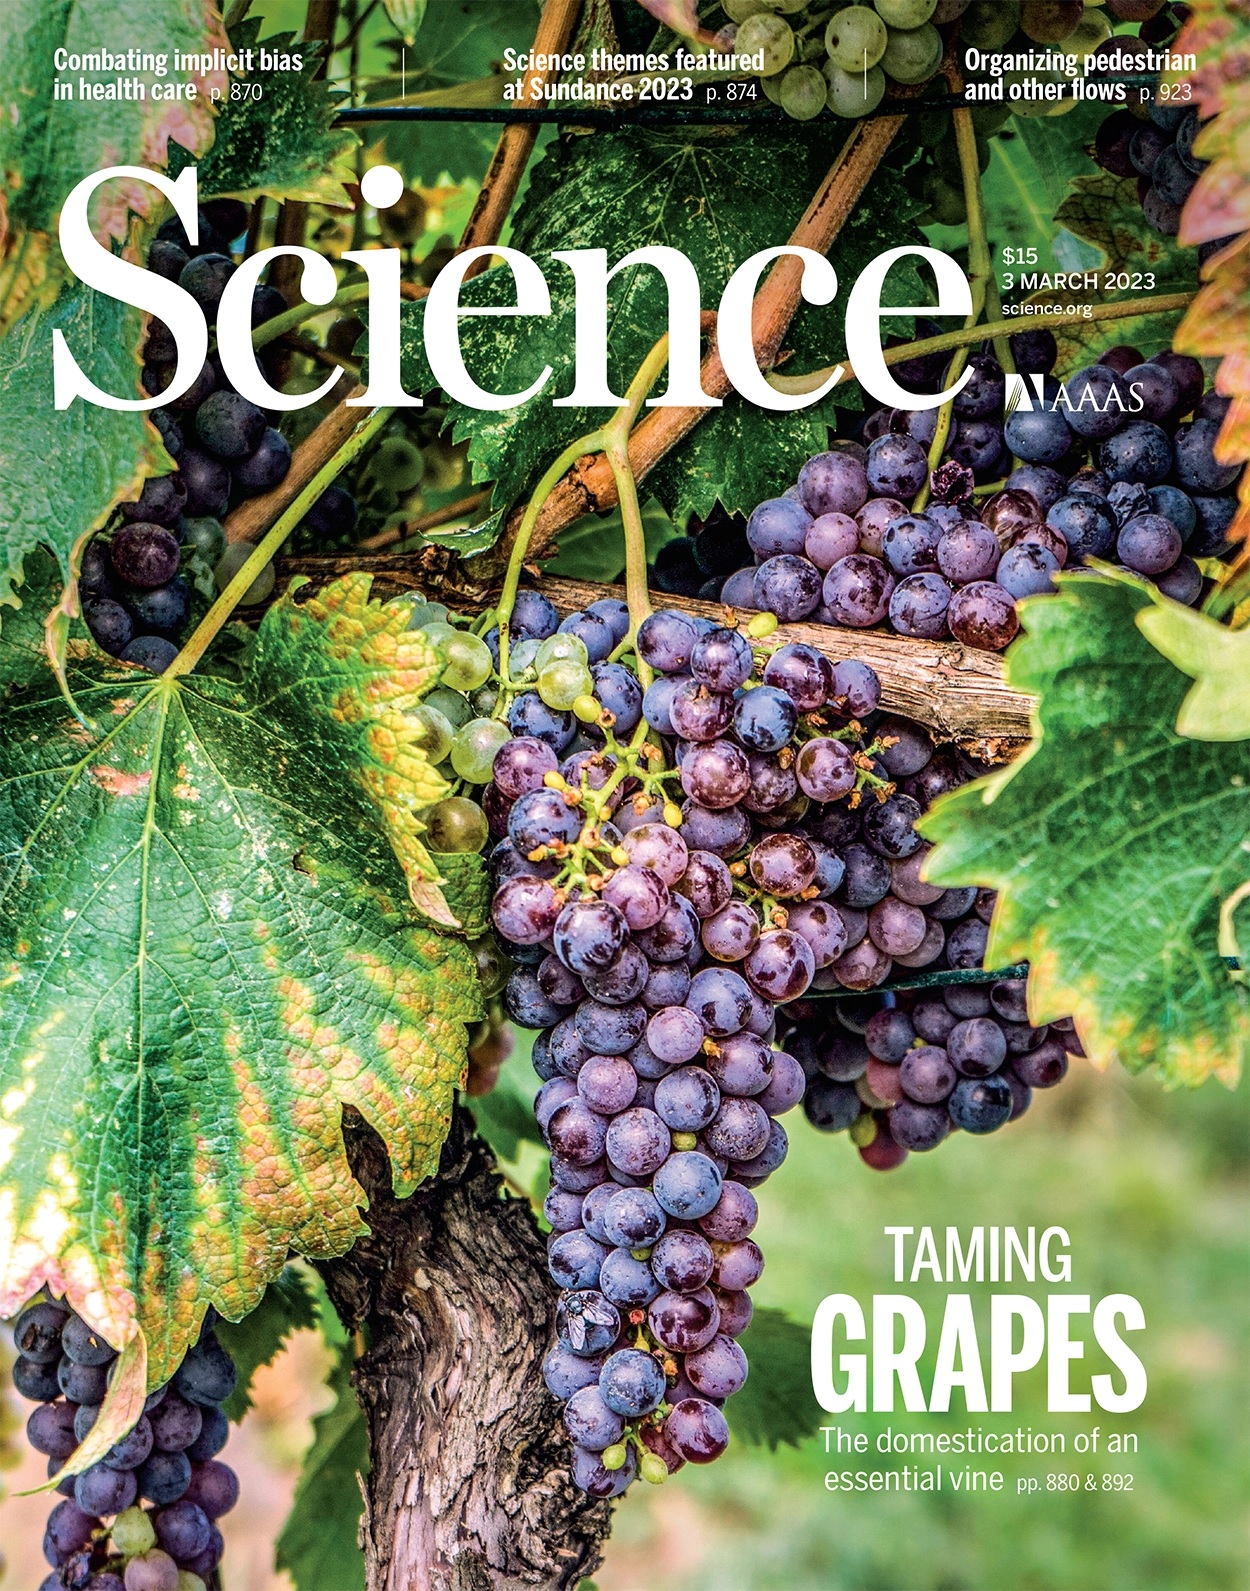 science-grapes-03032023